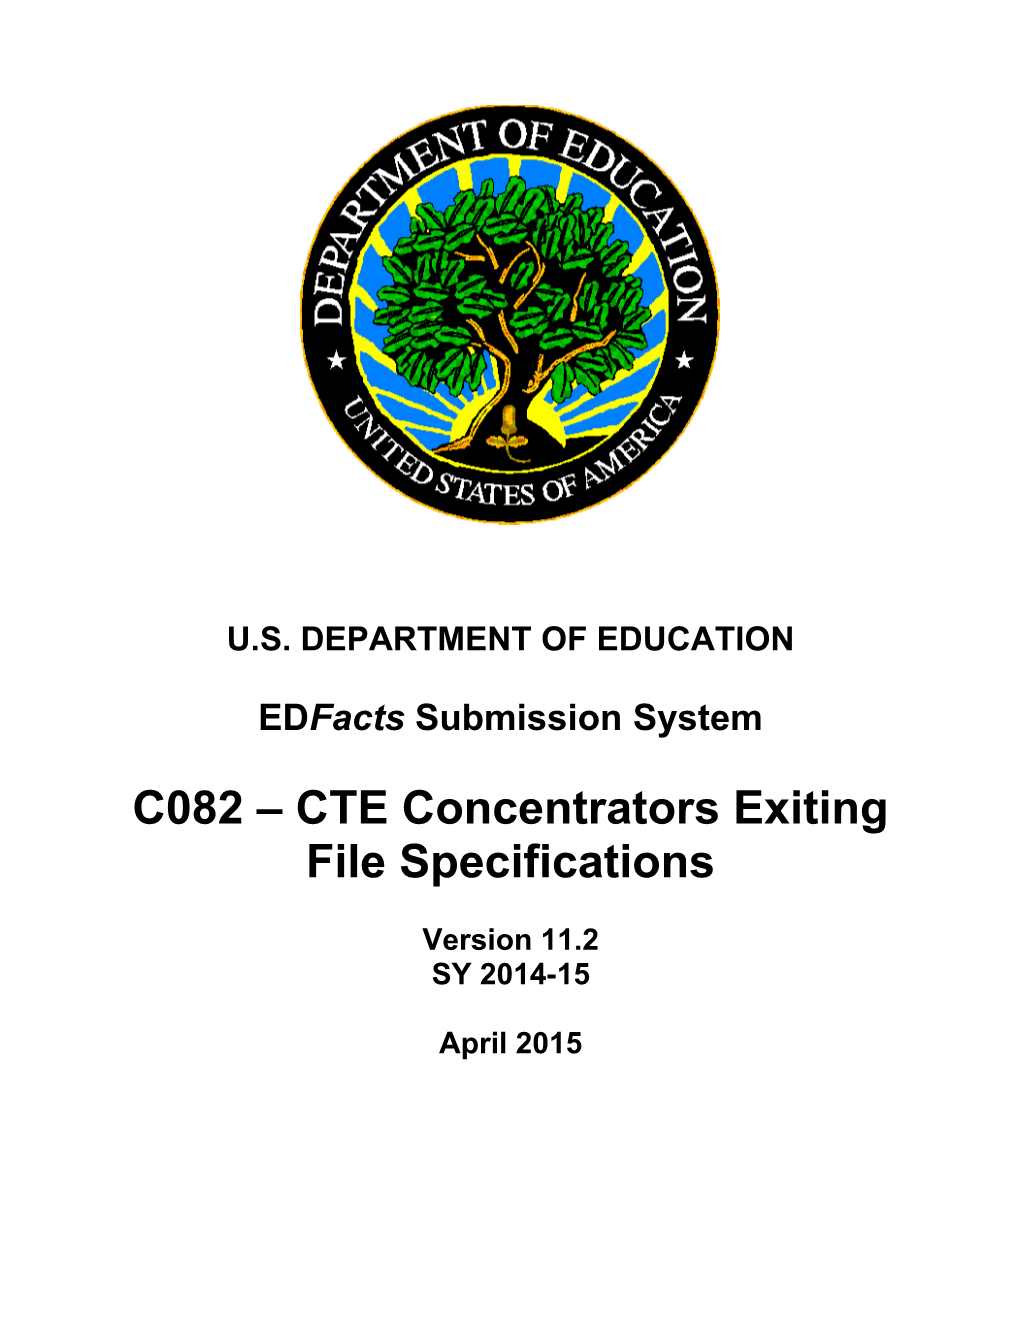 CTE Concentrators Exiting File Specifications